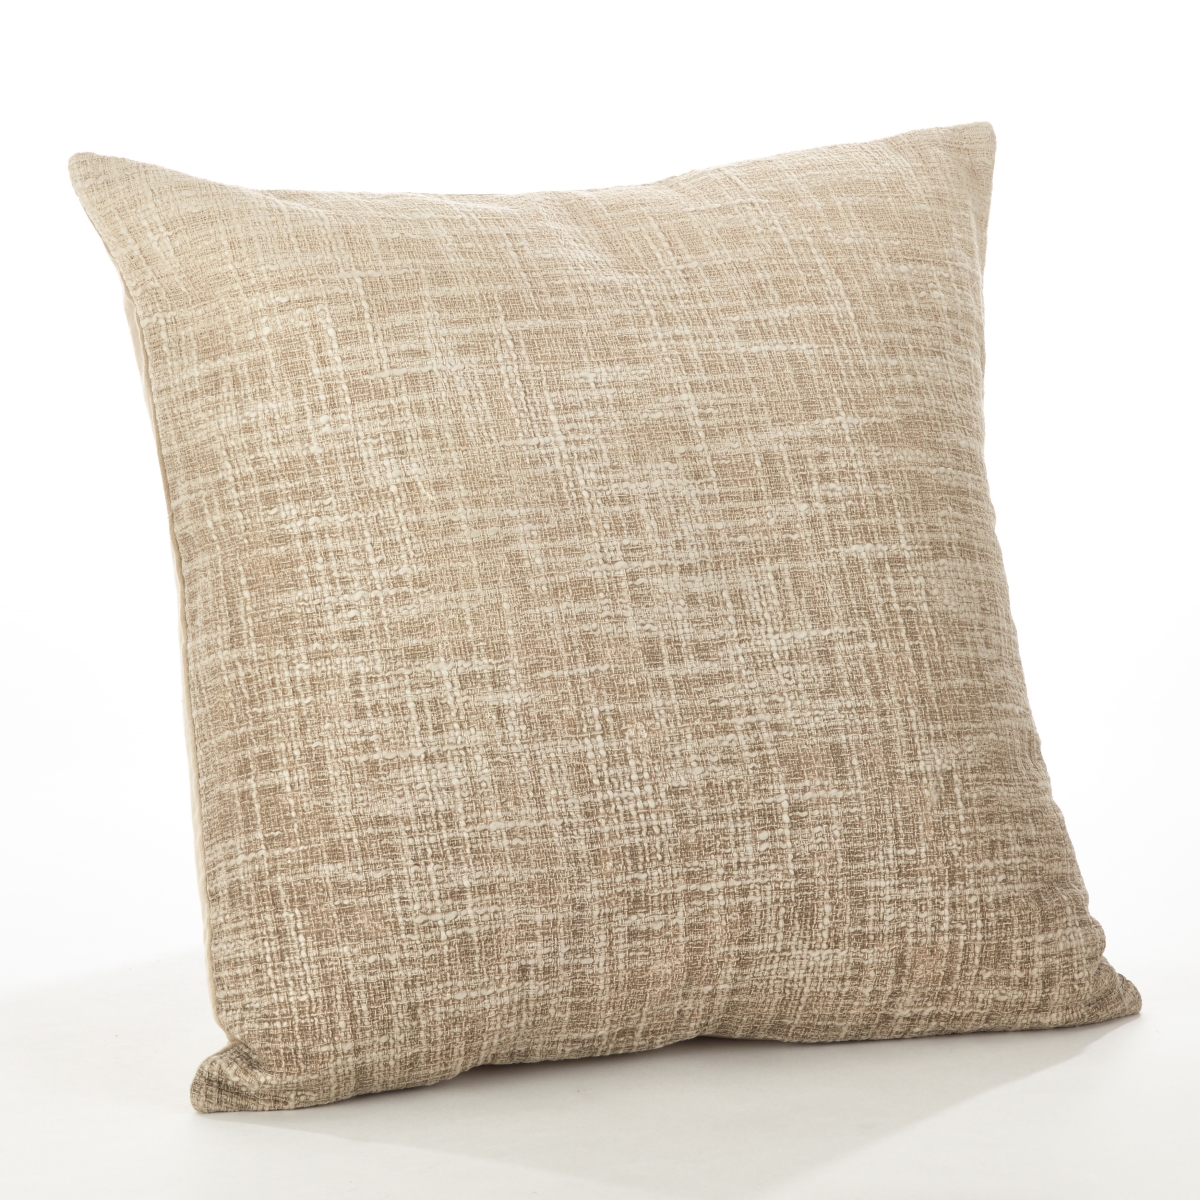 0009.n20s 20 In. Ombre Design Down Filled Cotton Throw Pillow, Natural